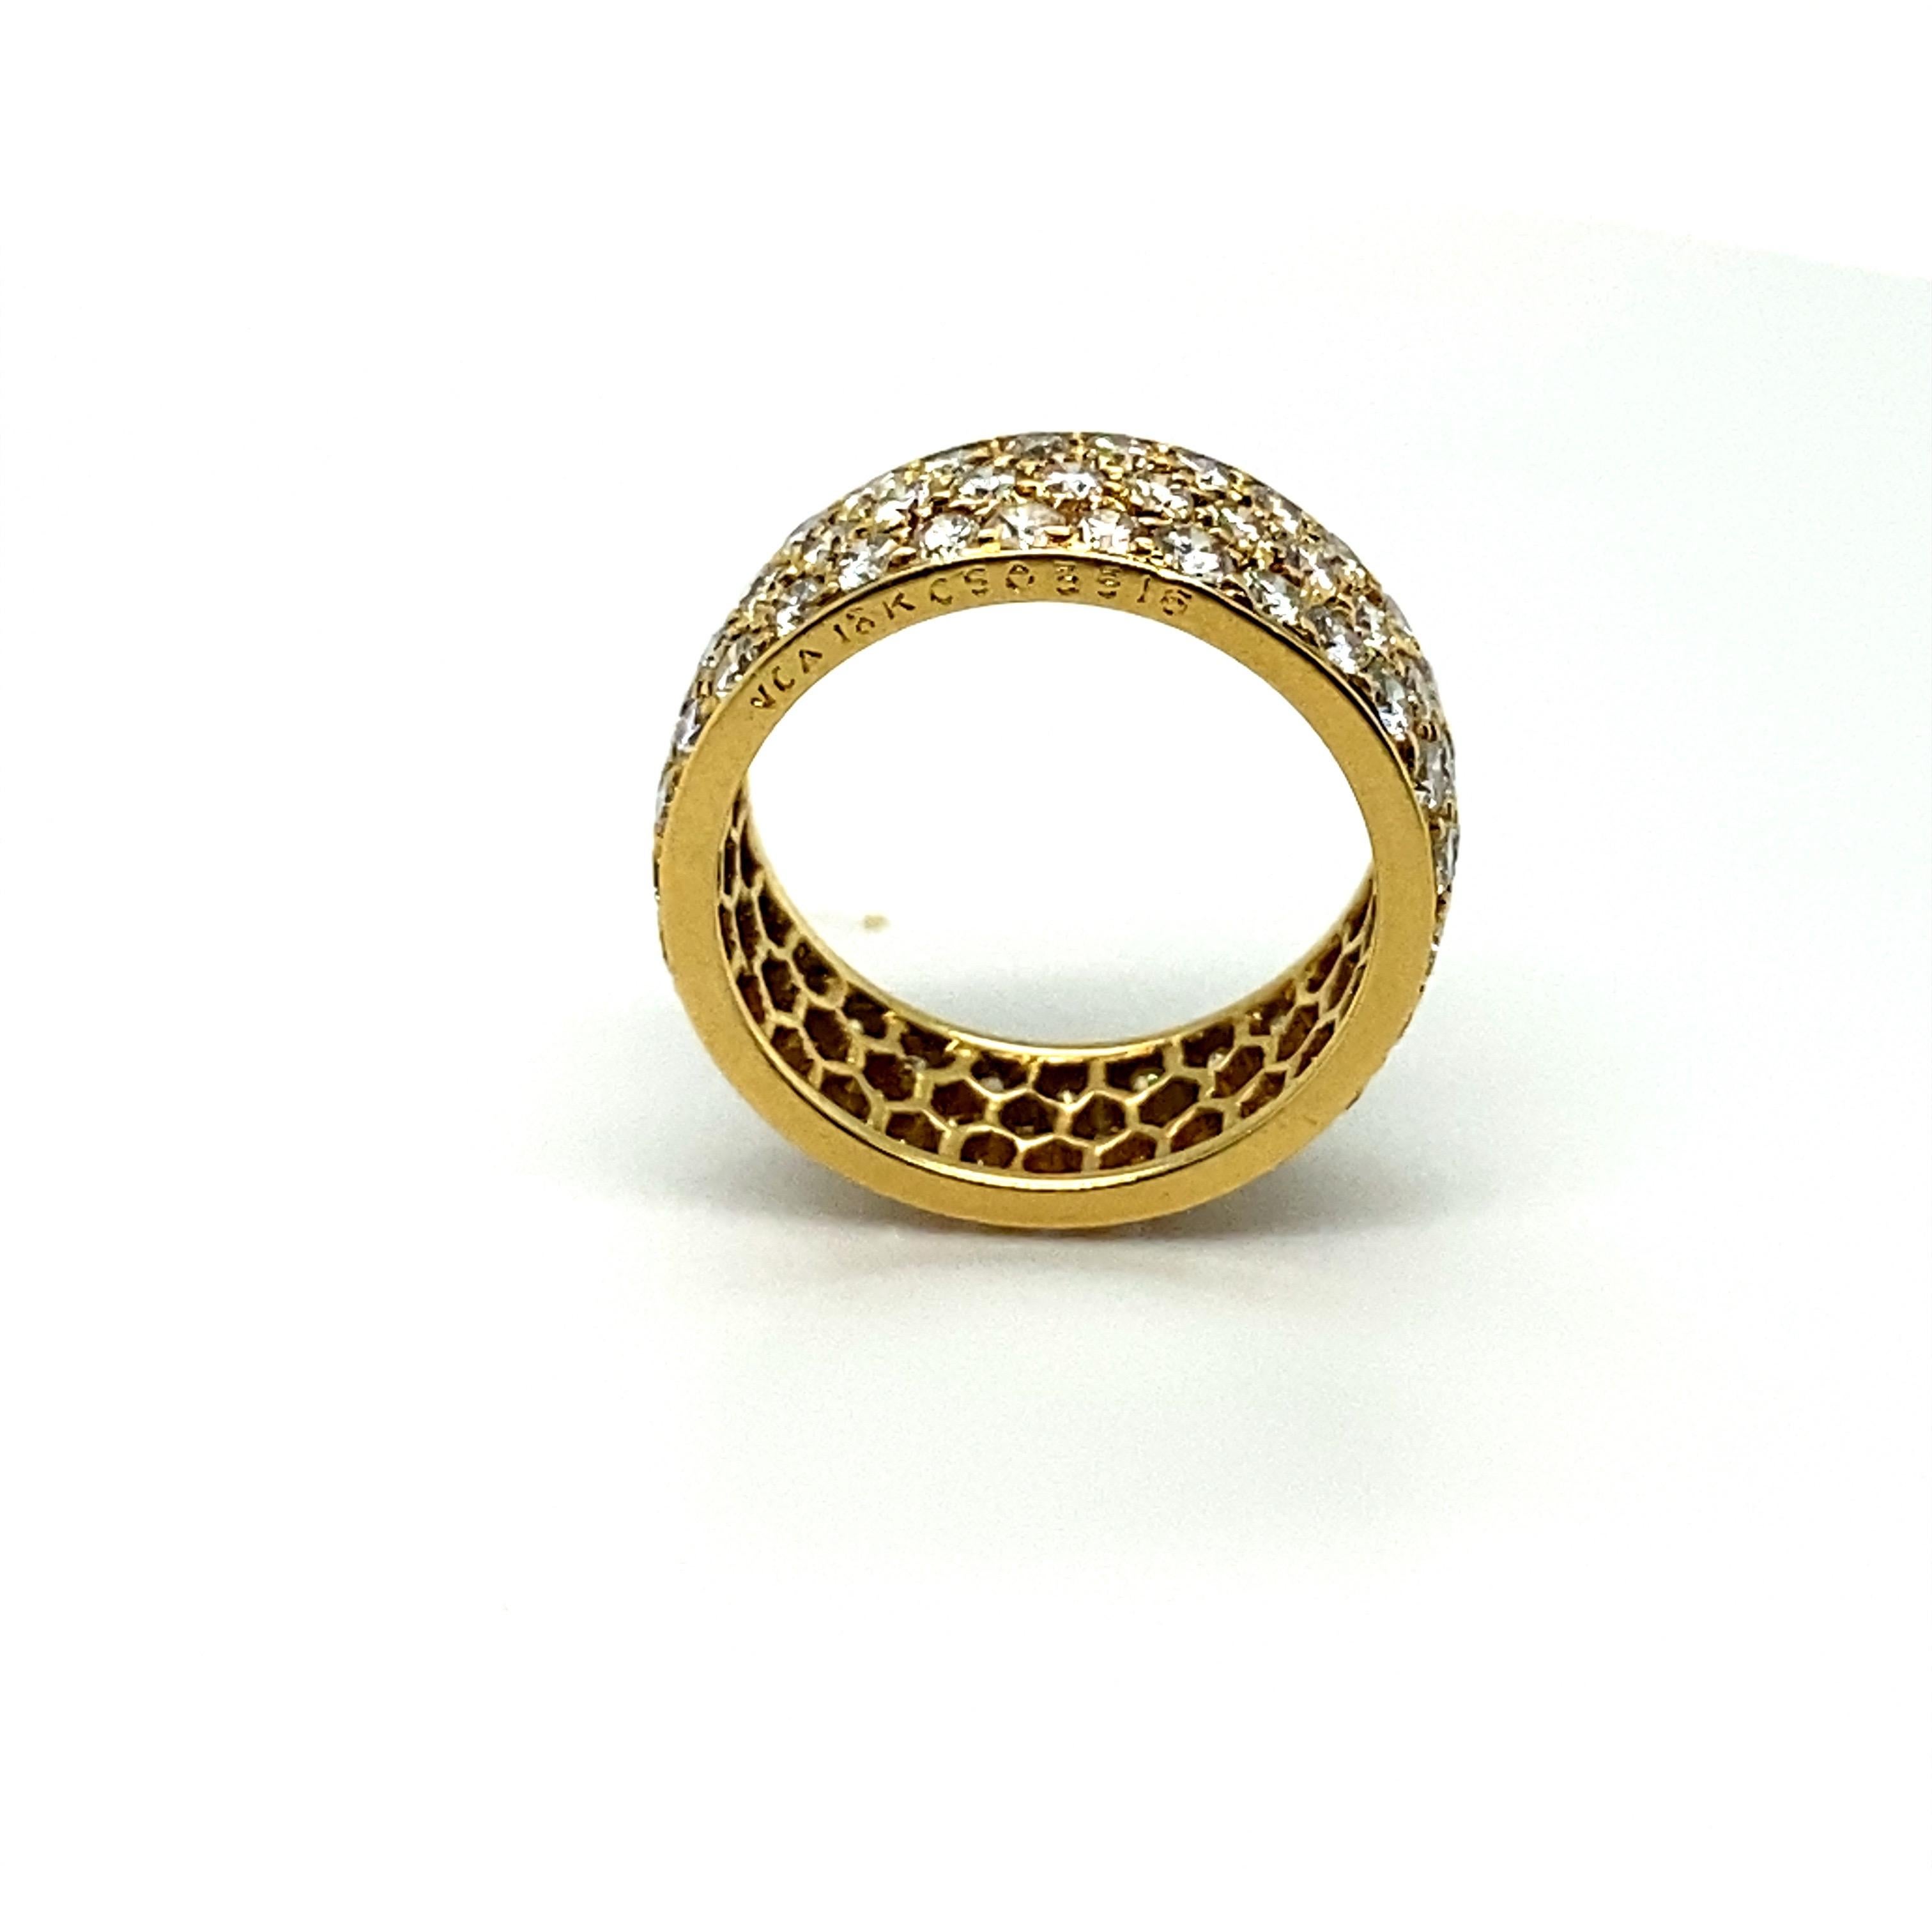 This Van Cleef & Arpels ring features approximately 4 carats of round brilliant diamonds set in 18K yellow gold. Article No. CS05516. Size 6.5. 